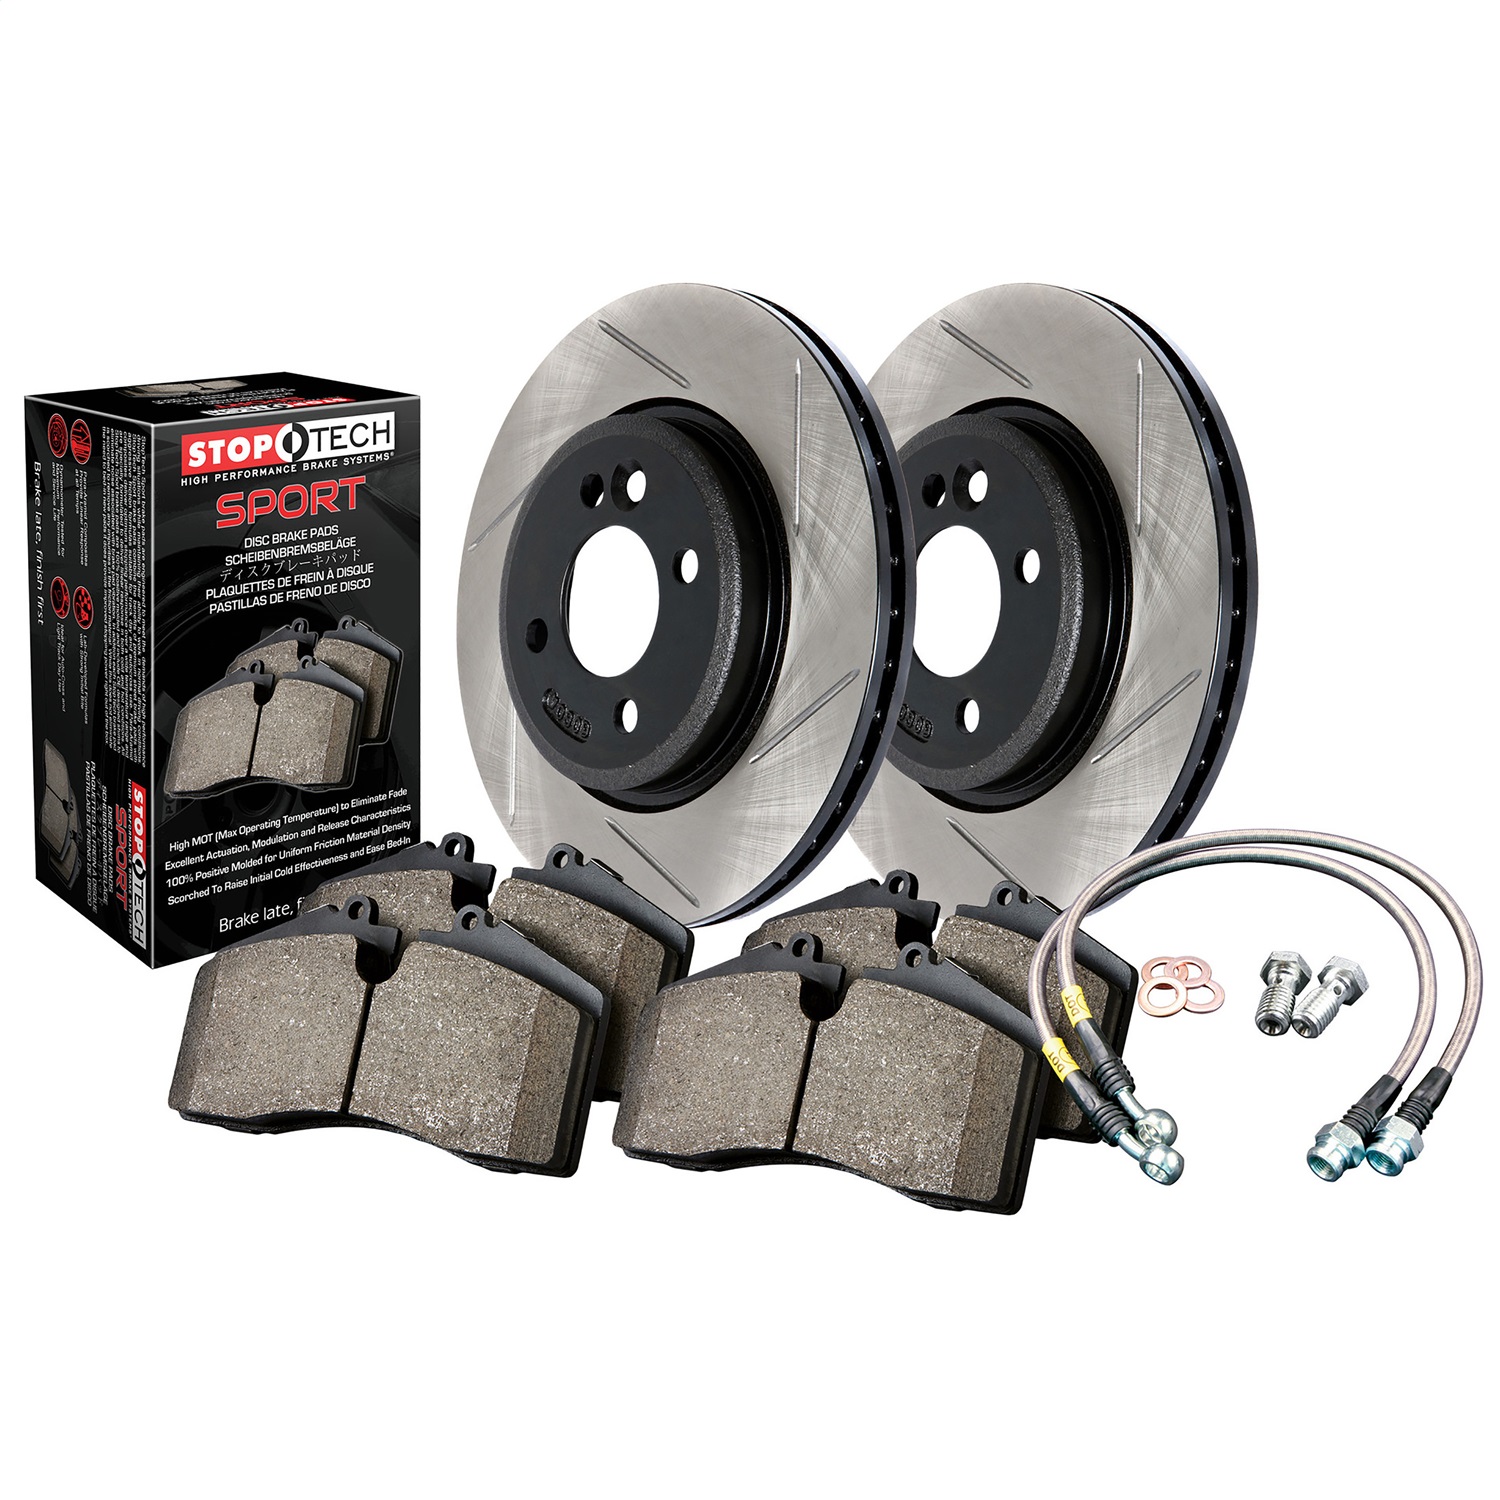 StopTech 977.33009R Sport Disc Brake Kit w/Slotted Rotors